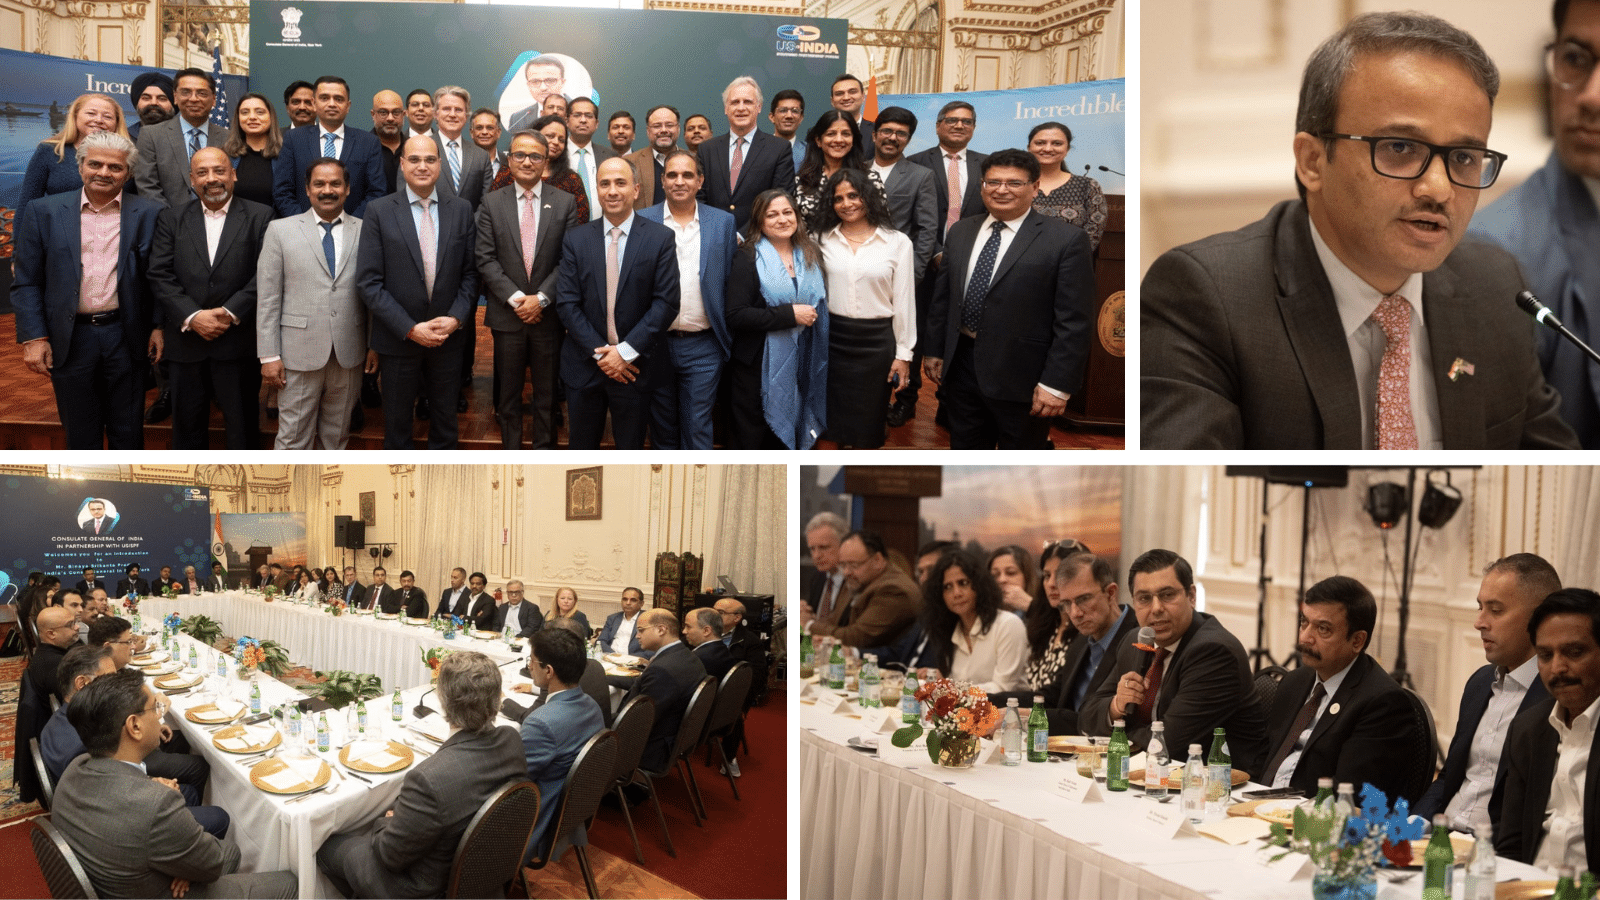 USISPF alongside CGI New York, was delighted to host Consul General Binaya Pradhan's first roundtable discussion with CEOs and business leaders in New York